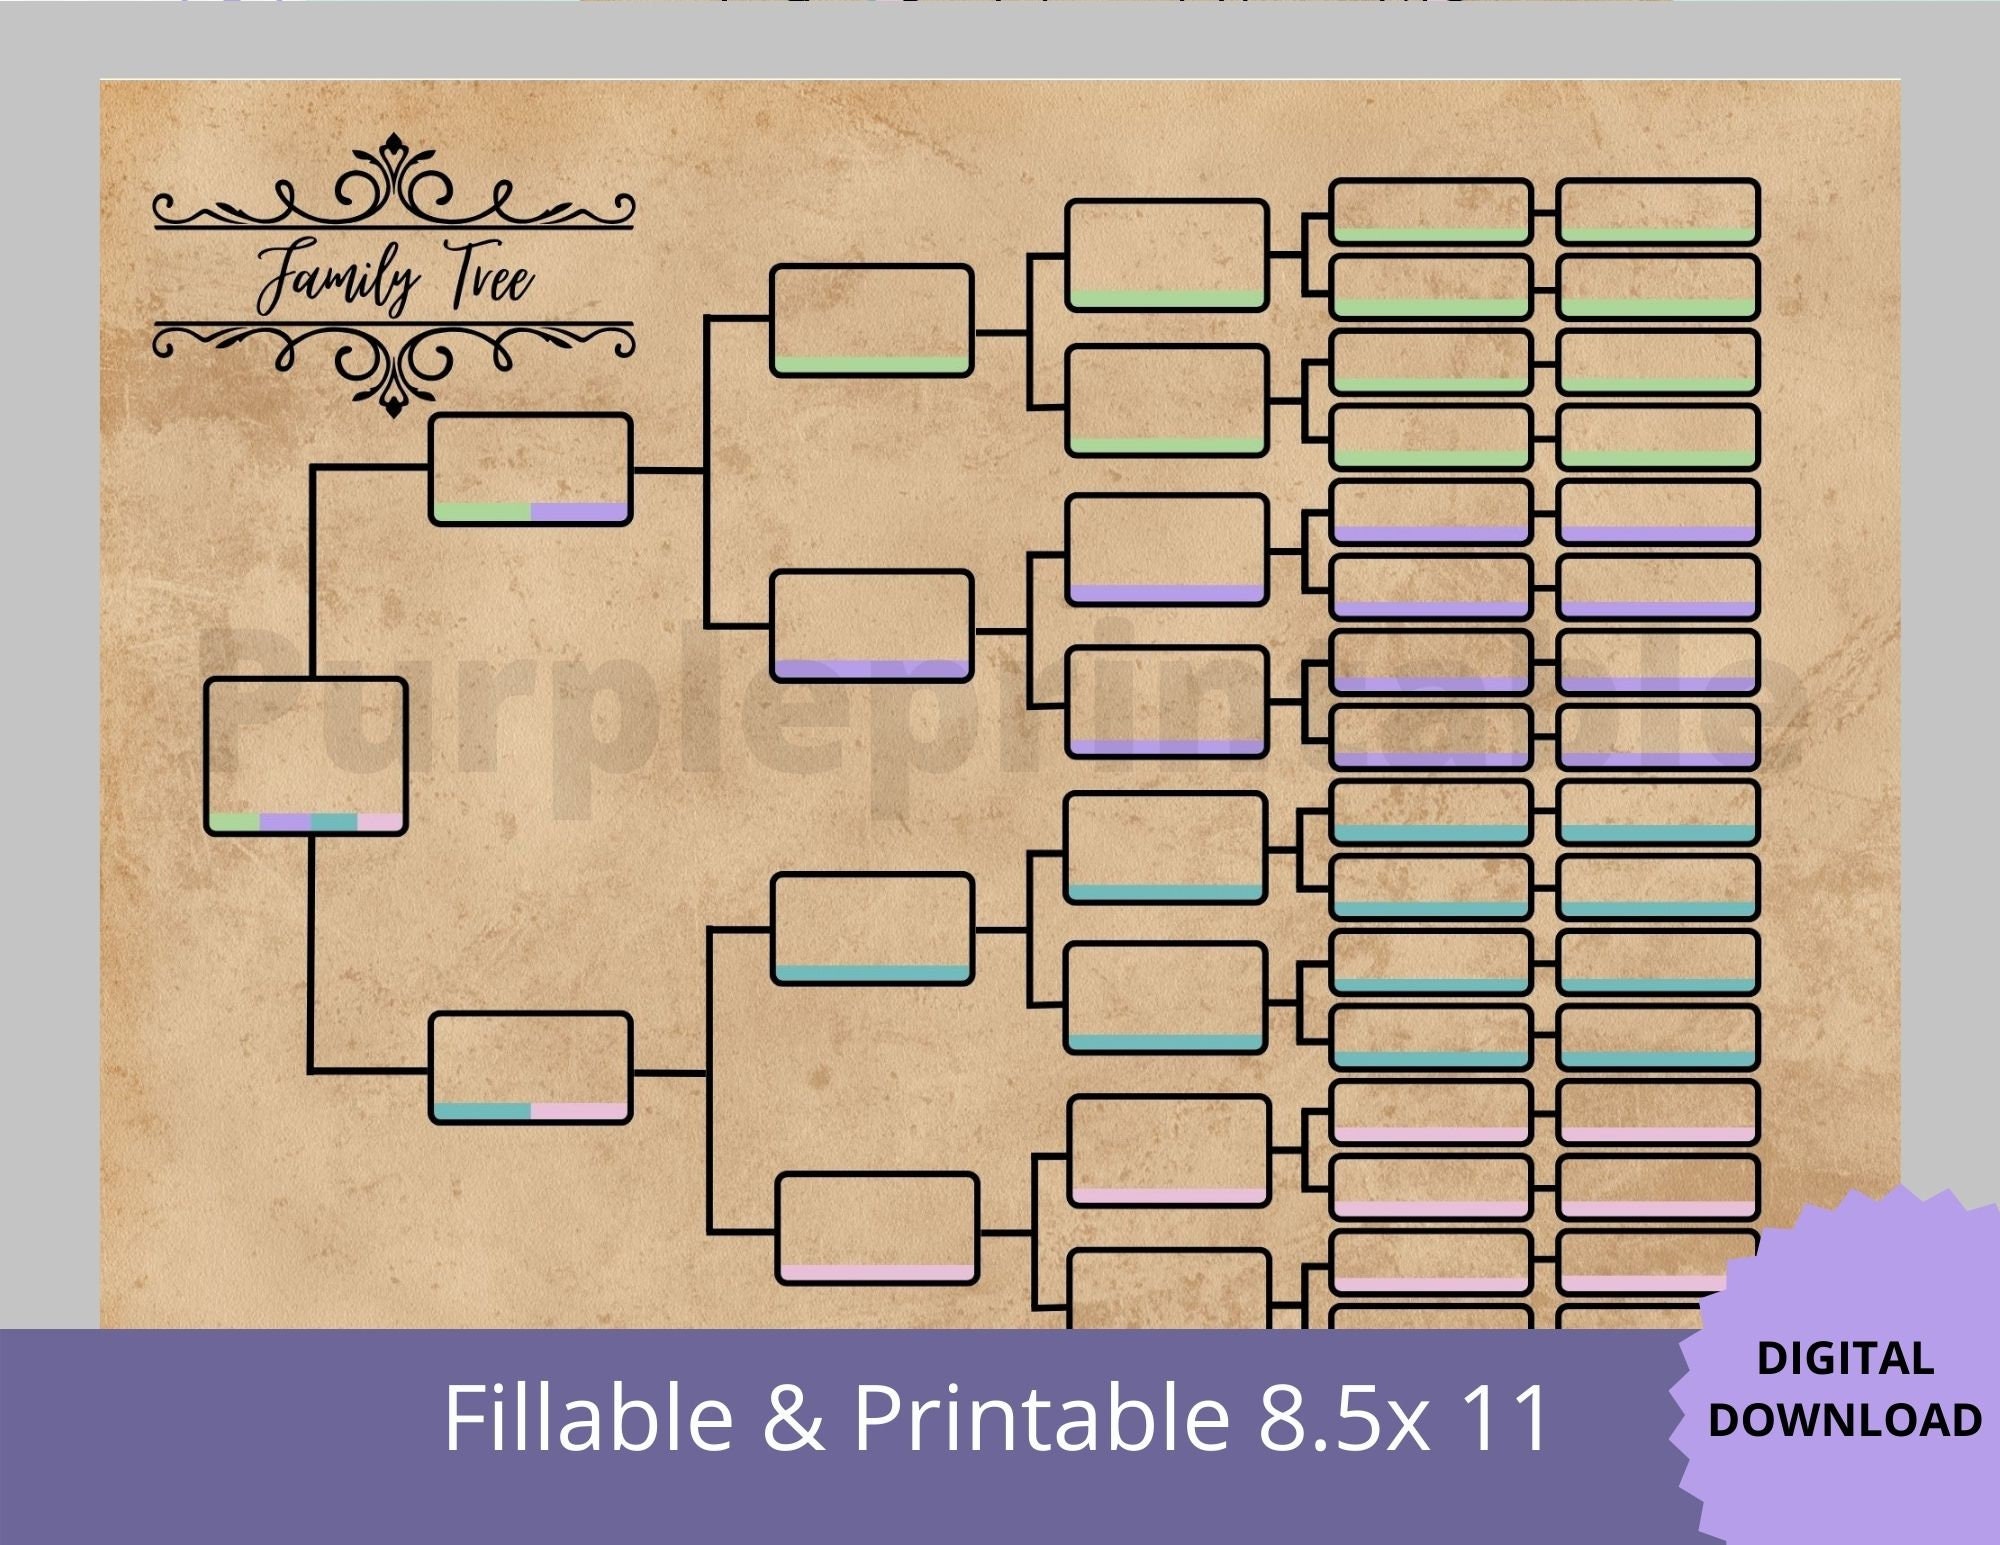 Palace Learning 1 Pack - Family Tree Chart To Fill In - 6 Generation  Genealogy Poster - Blank Fillable Ancestry Chart [Version 1] - 18 x 24